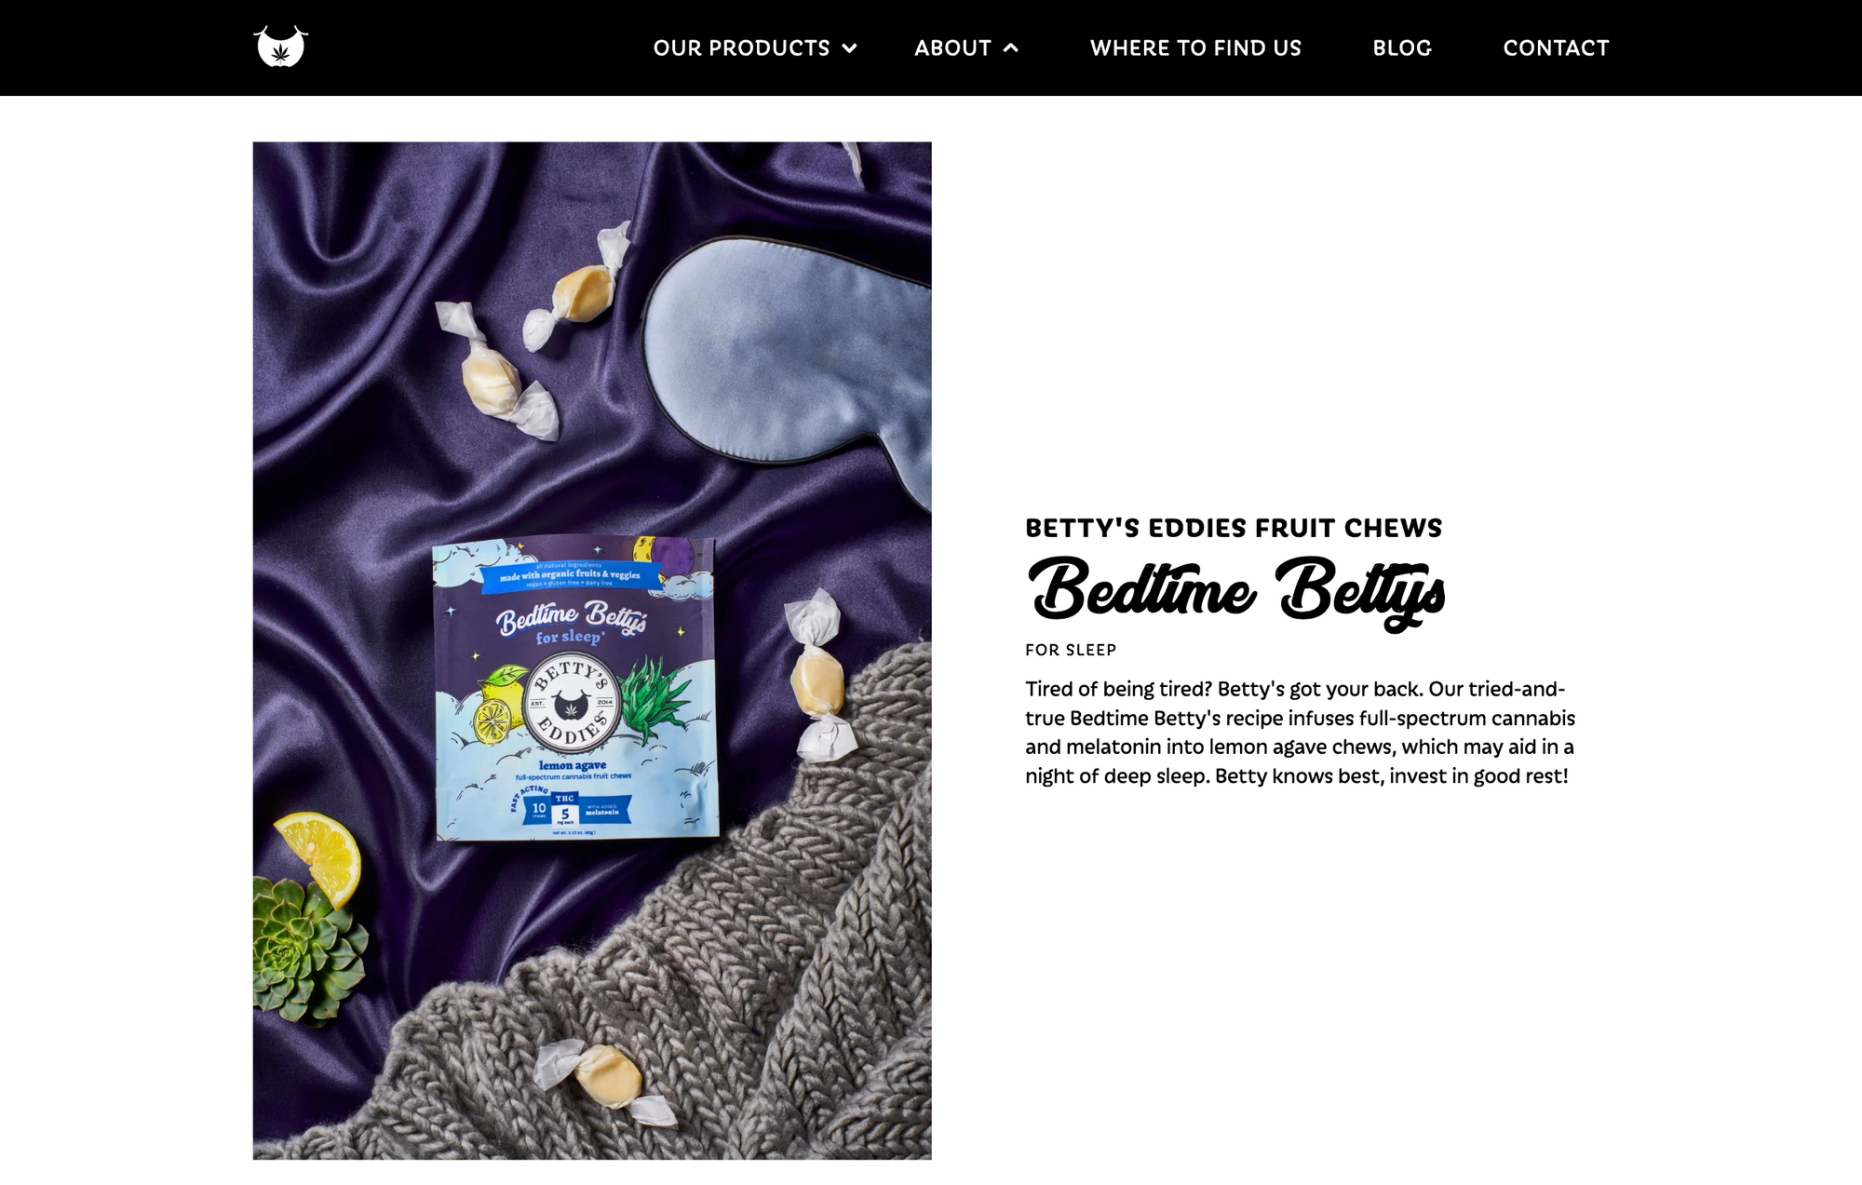 Betty's Eddies product page